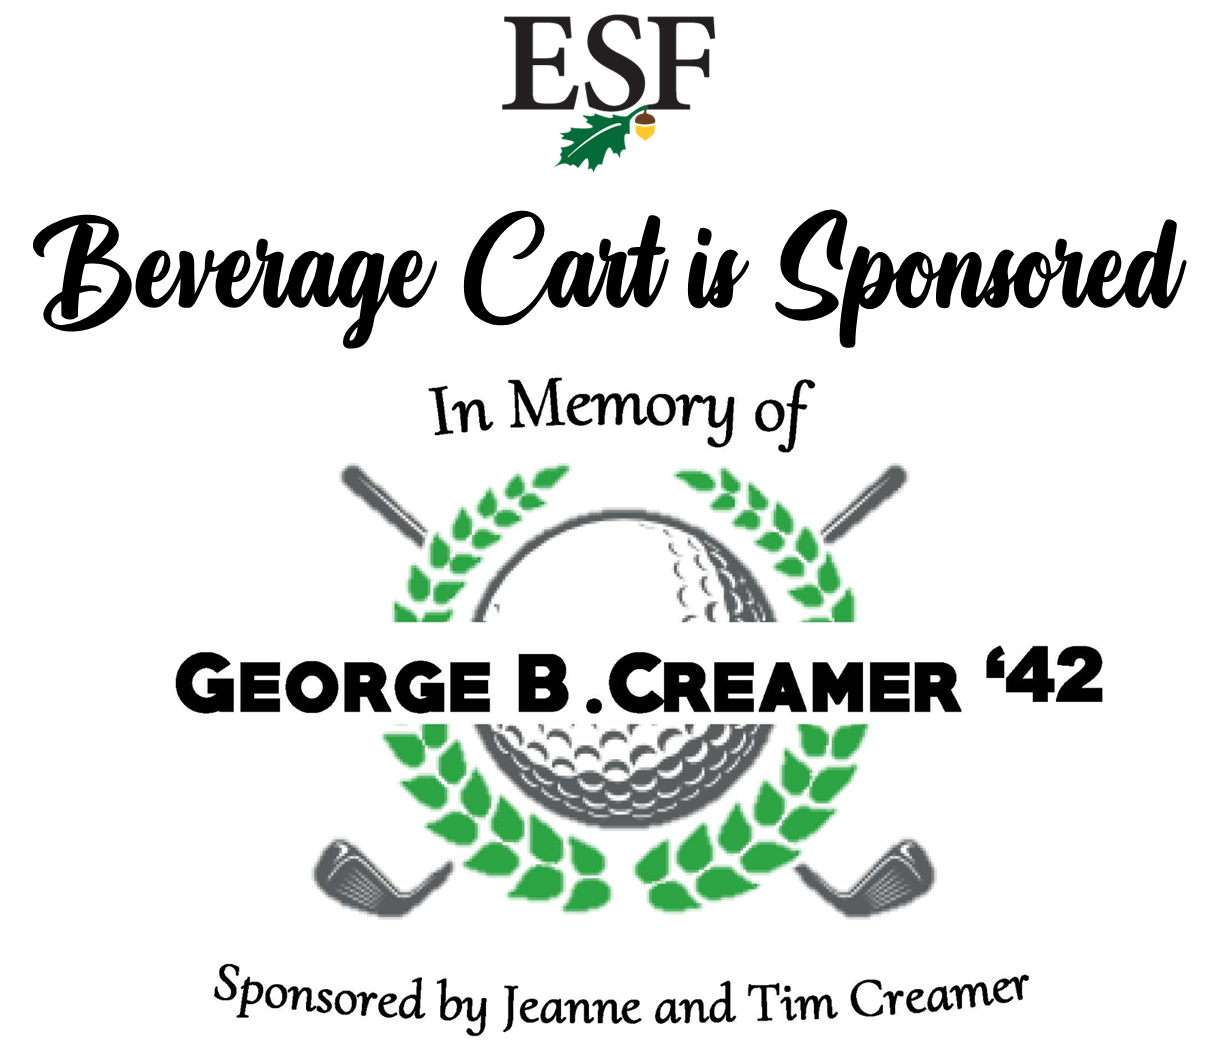 Beverage Cart is sponsored in memory of George B Creamer batch of 42 sponsored by Jearome and Tim Creamer